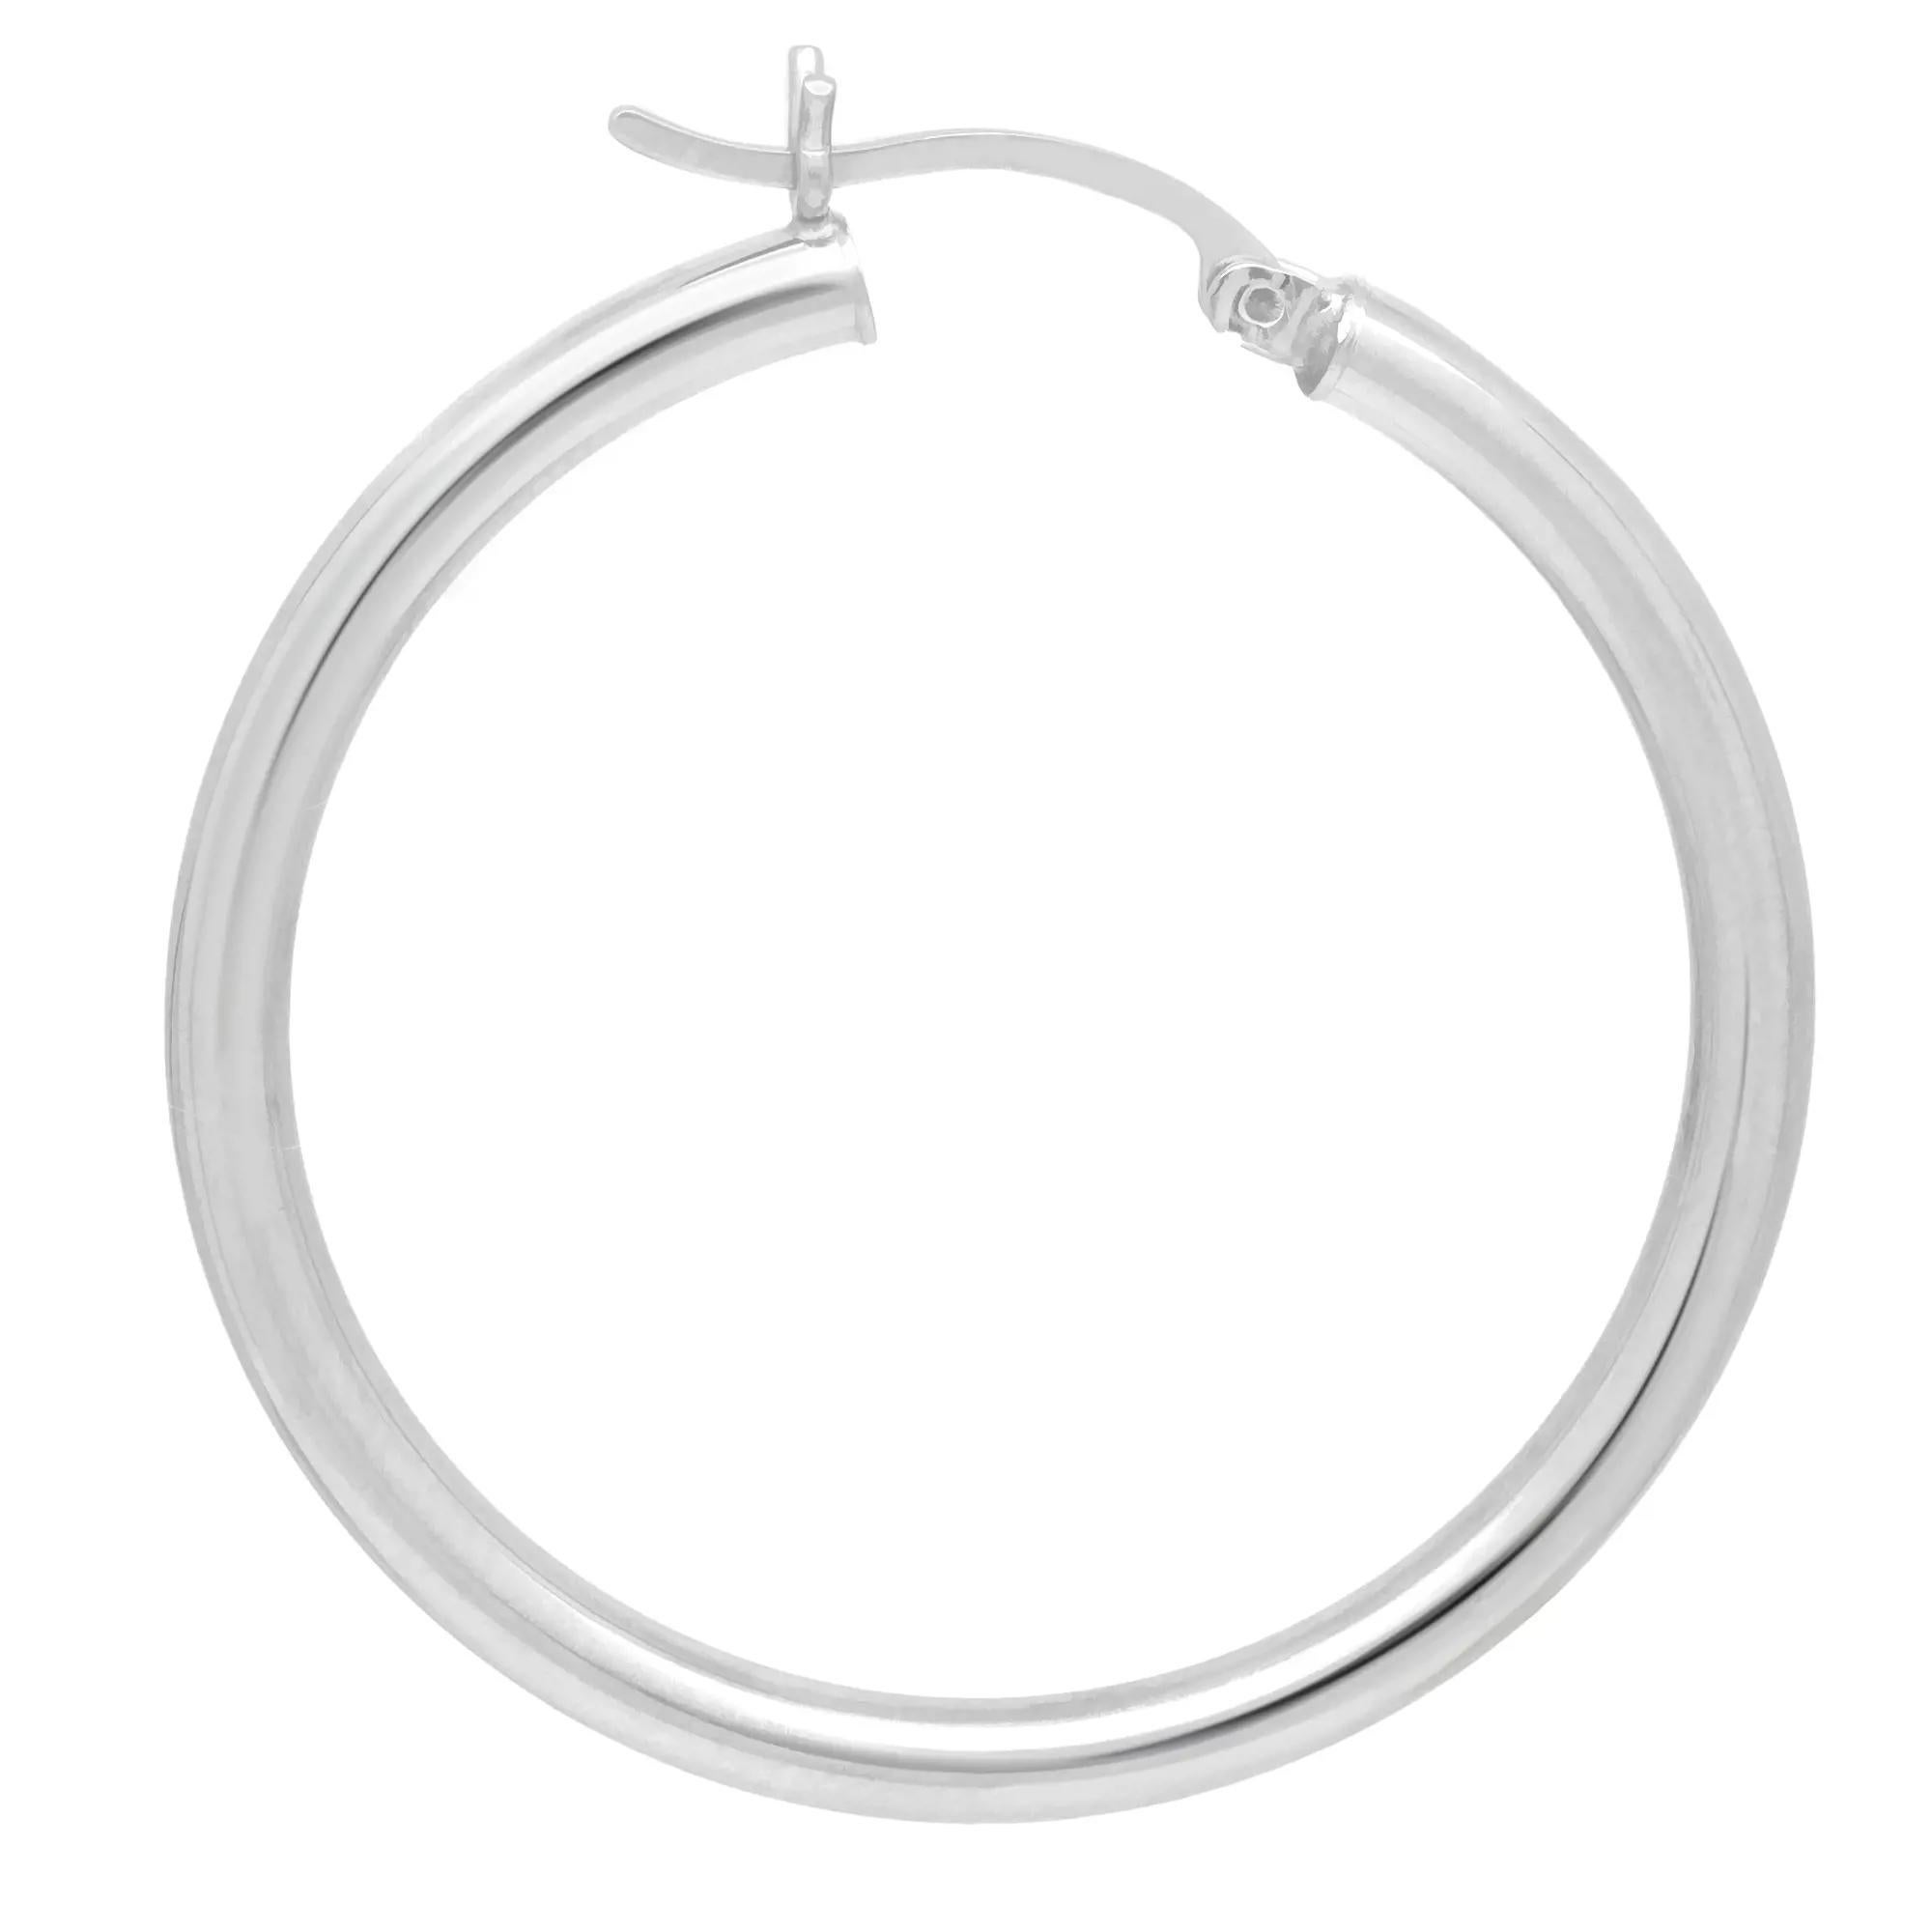 These medium round hoop earrings are crafted in 14k white gold and feature a majestic glow of high polish finish. This pair of hoop earrings will make a fashion statement and definitely be an eye catching pair. Size: 1.4 inches. Width: 3.1mm.